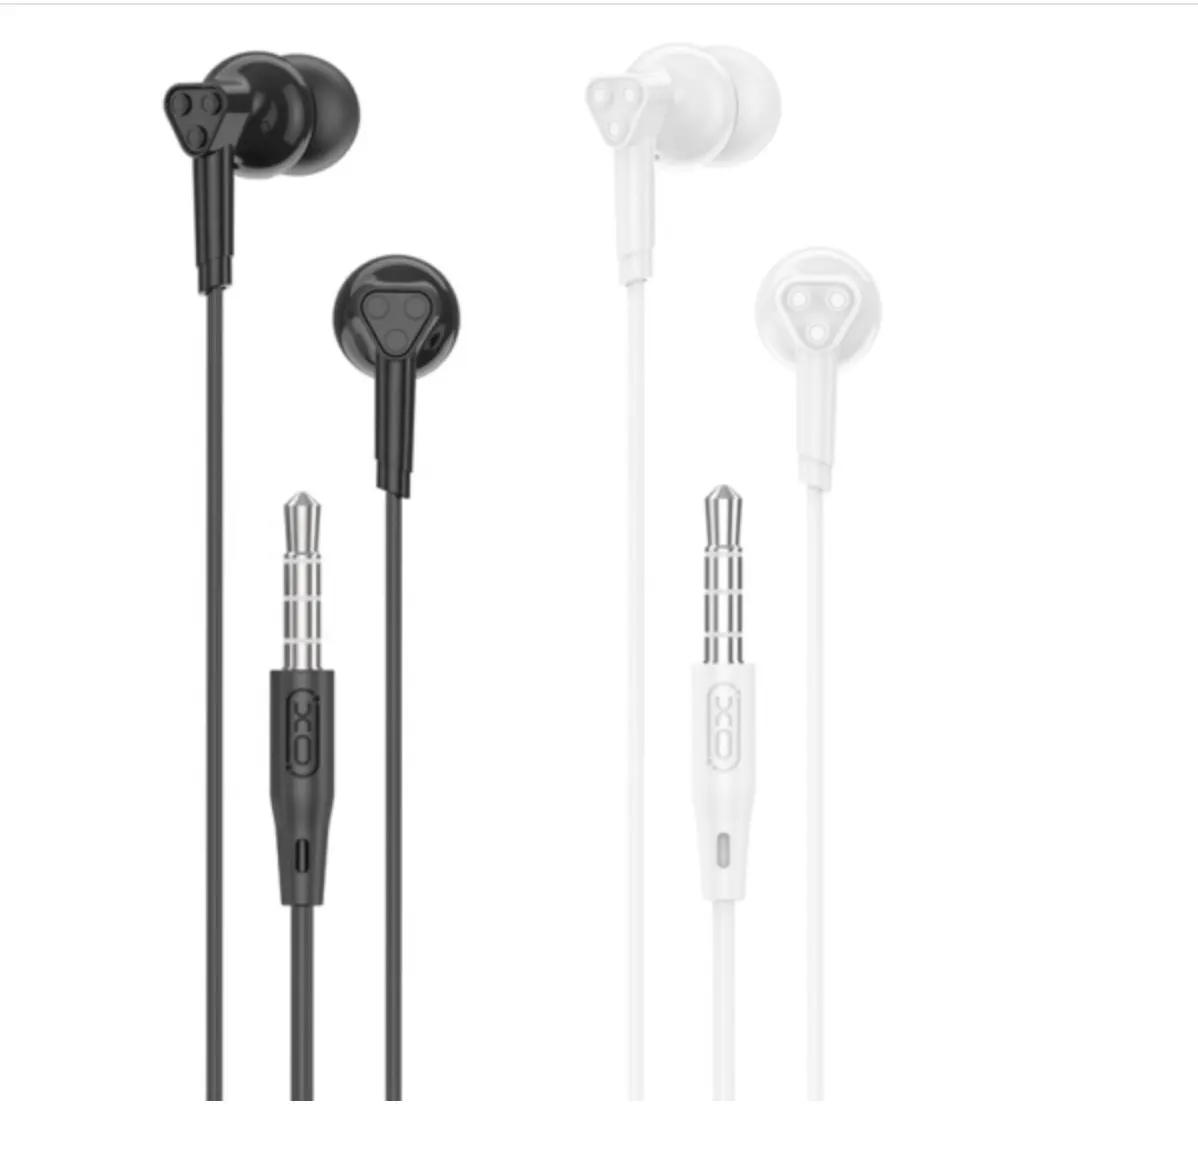 2021 Hot Sell Product Music Earphone In Ear Earphone Quality Headset With Stereo Earphones For Iphone